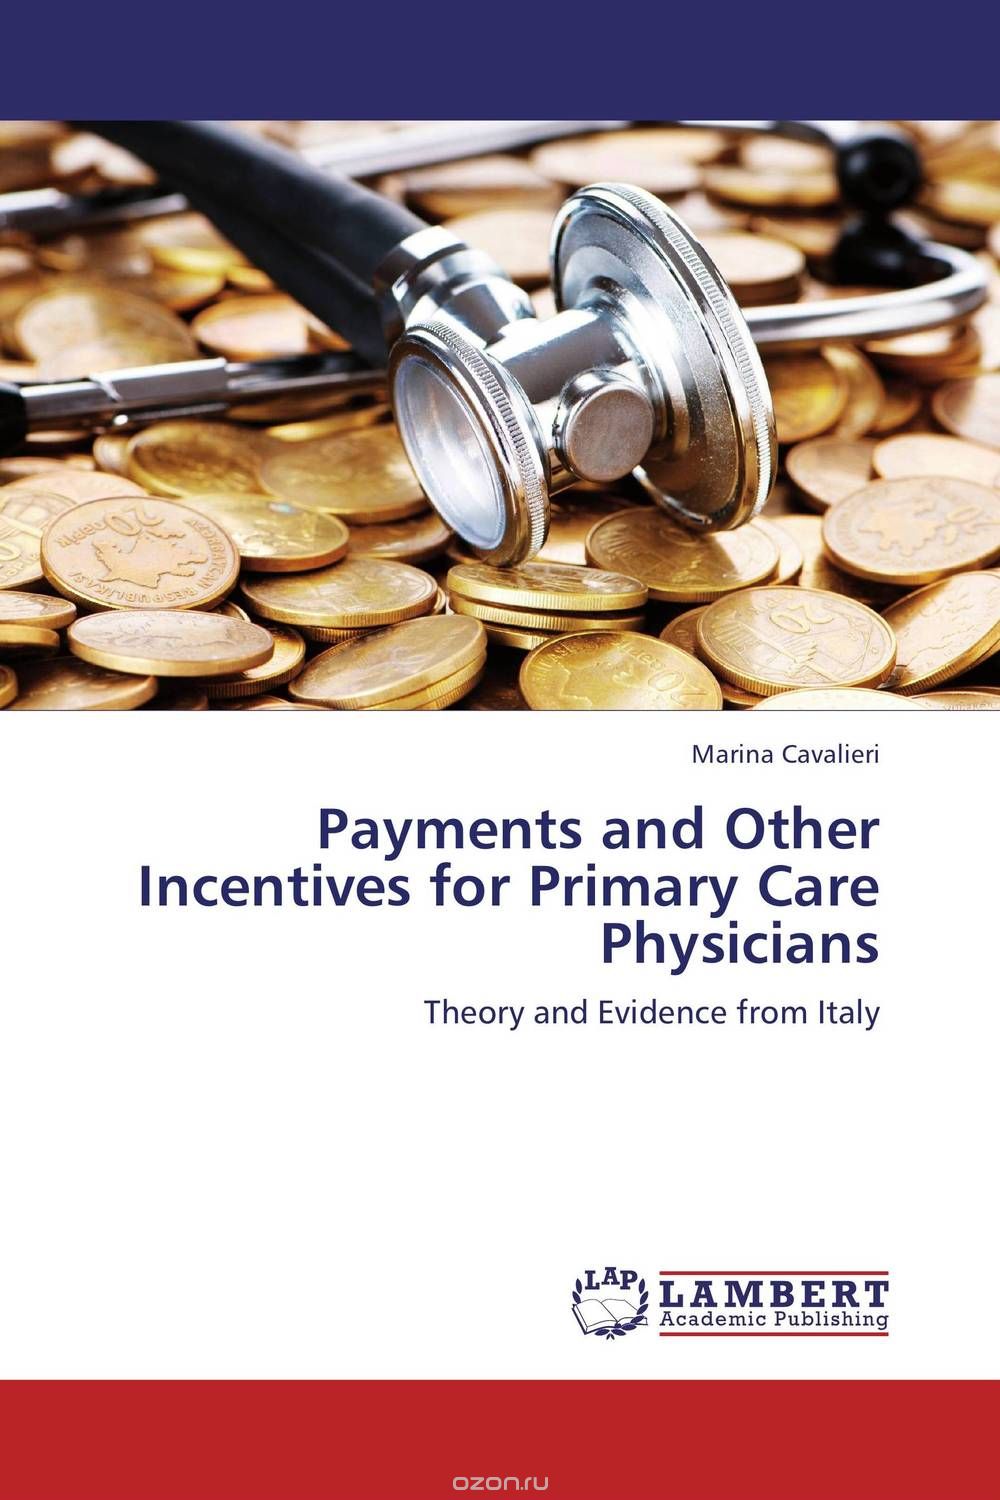 Скачать книгу "Payments and Other Incentives for Primary Care Physicians"